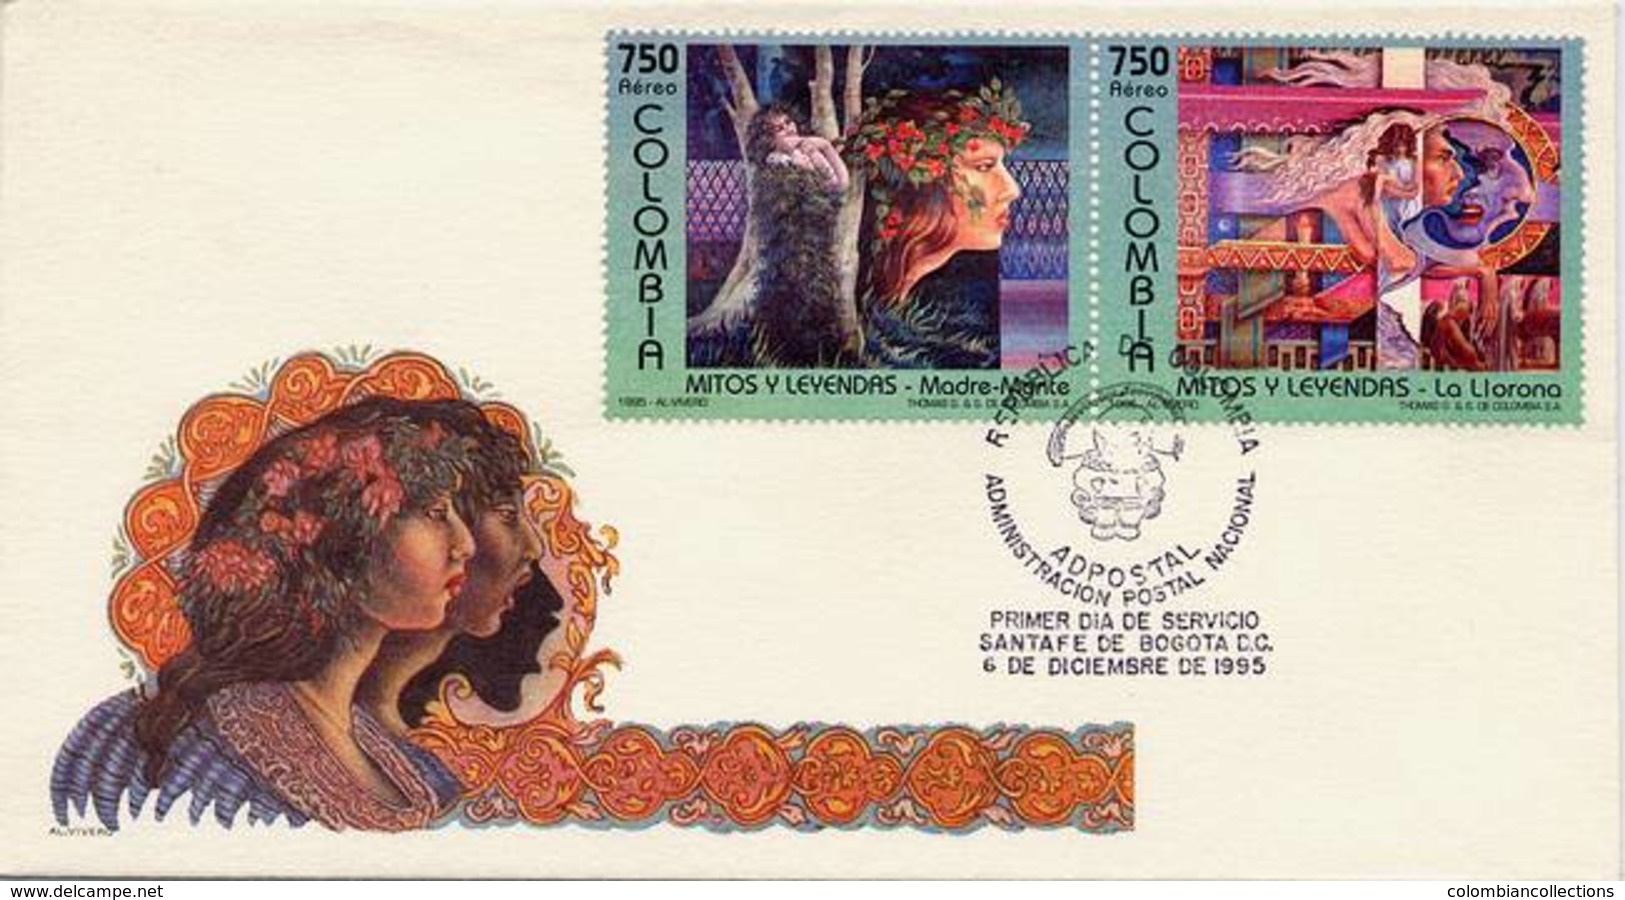 Lote 2008-9F, Colombia, 1995, SPD - FDC, Mitos Y Leyendas, Myths And Legends, Verde - Colombia